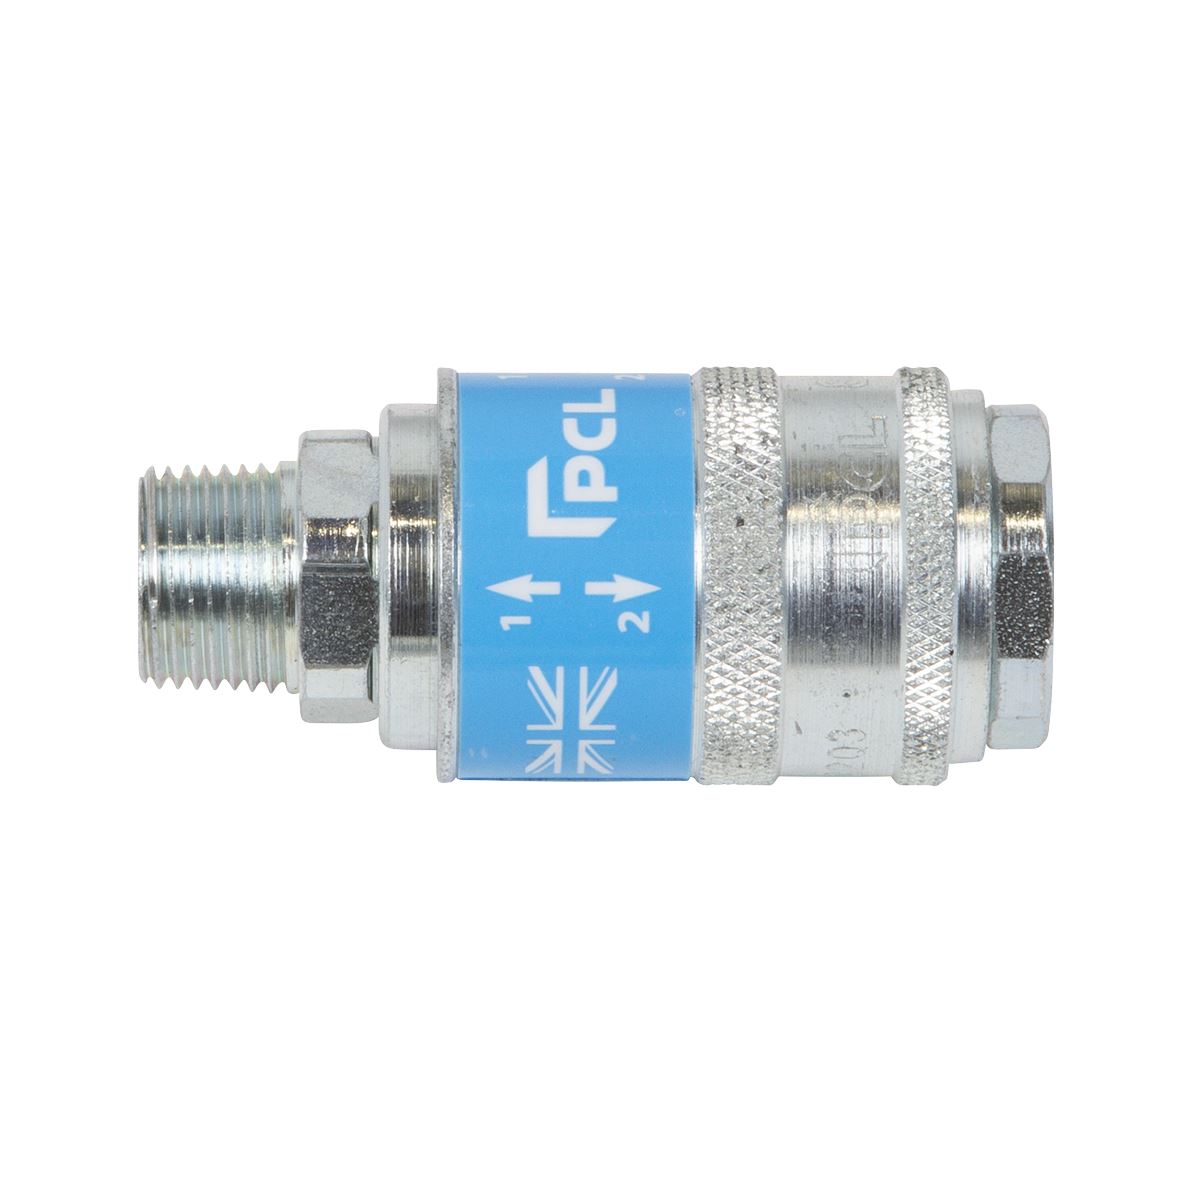 PCL Safeflow Safety Coupling Body Male 3/8"BSPT